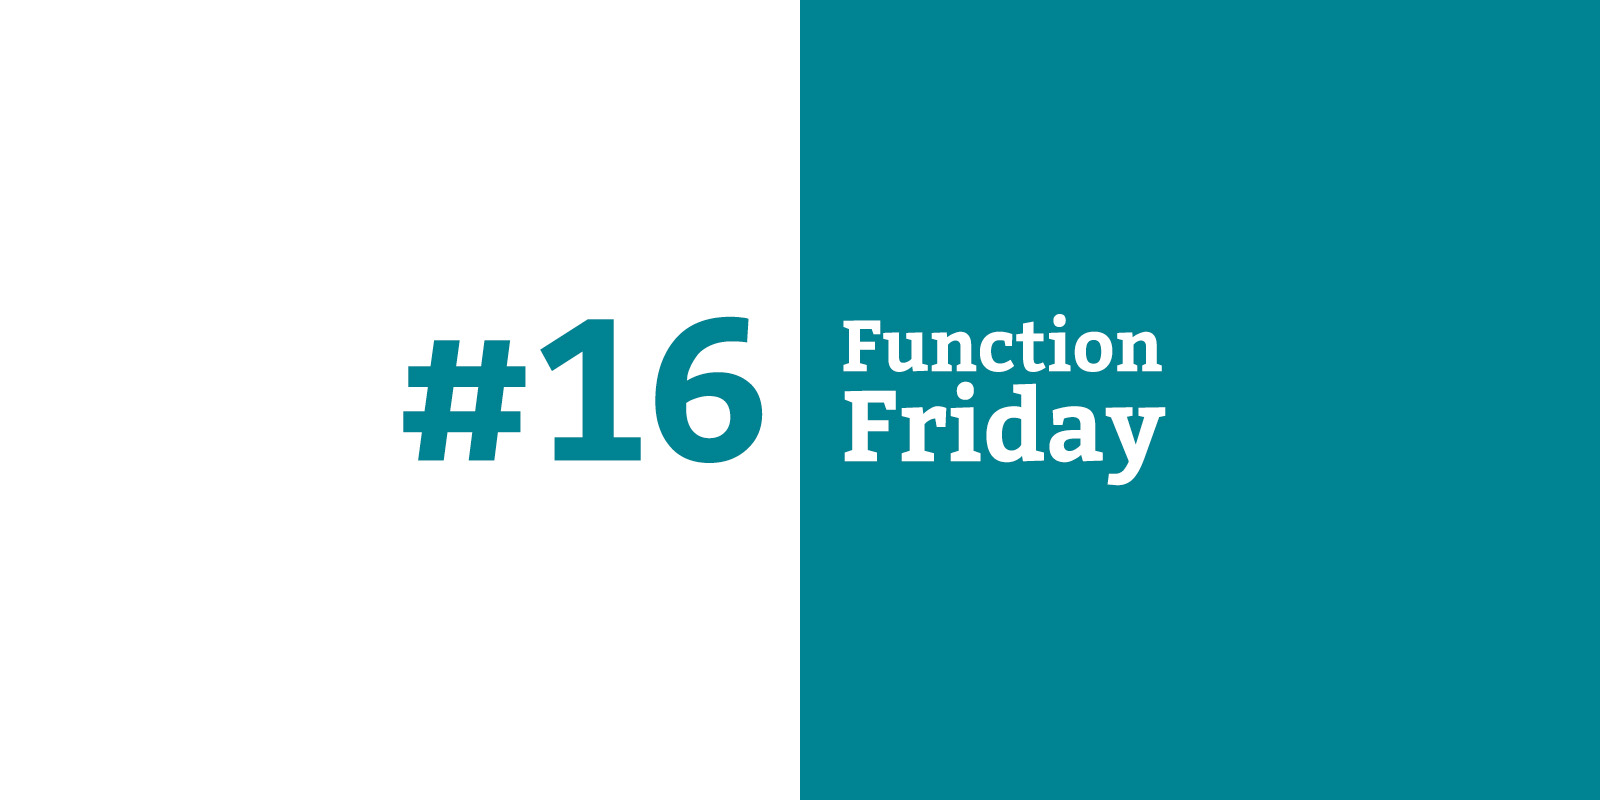 Function Friday #16